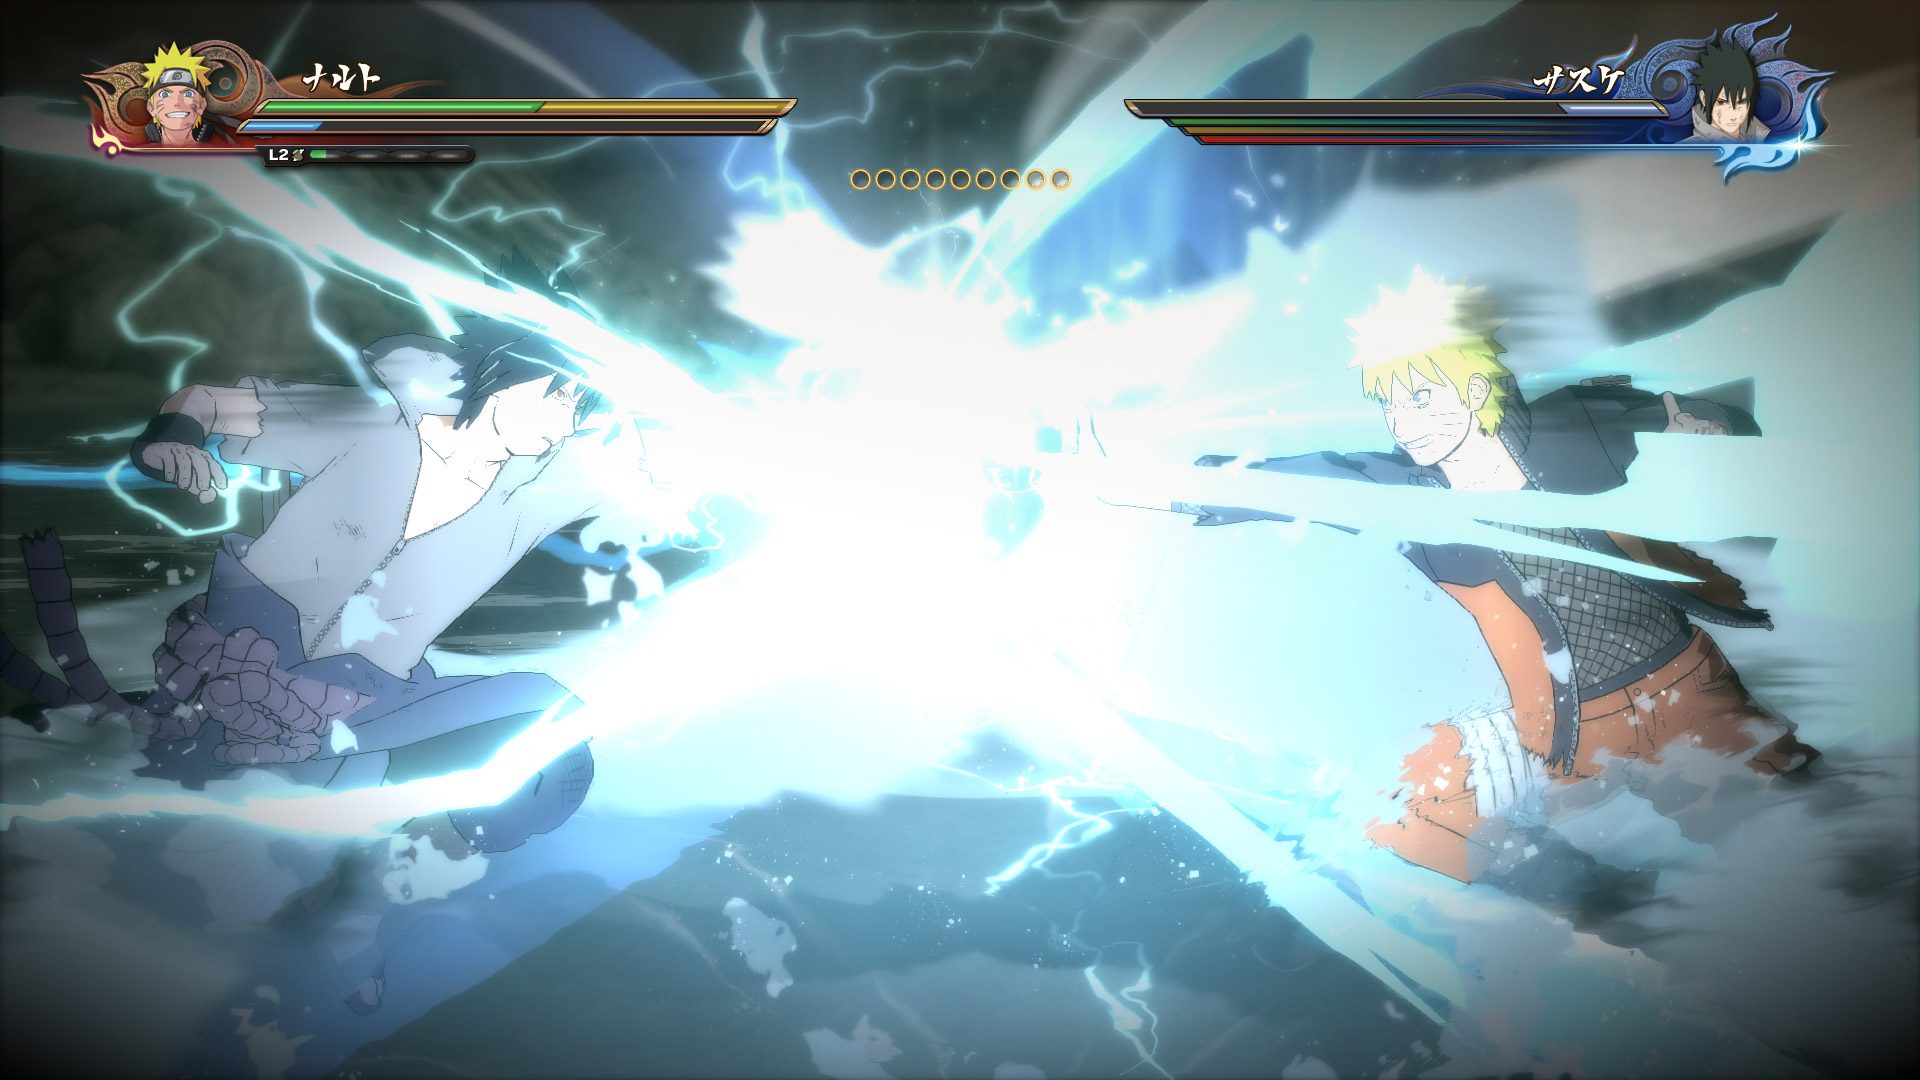 Naruto Shippuden Ultimate Ninja Storm 4 (Holographic Cover Art) No Game  Included